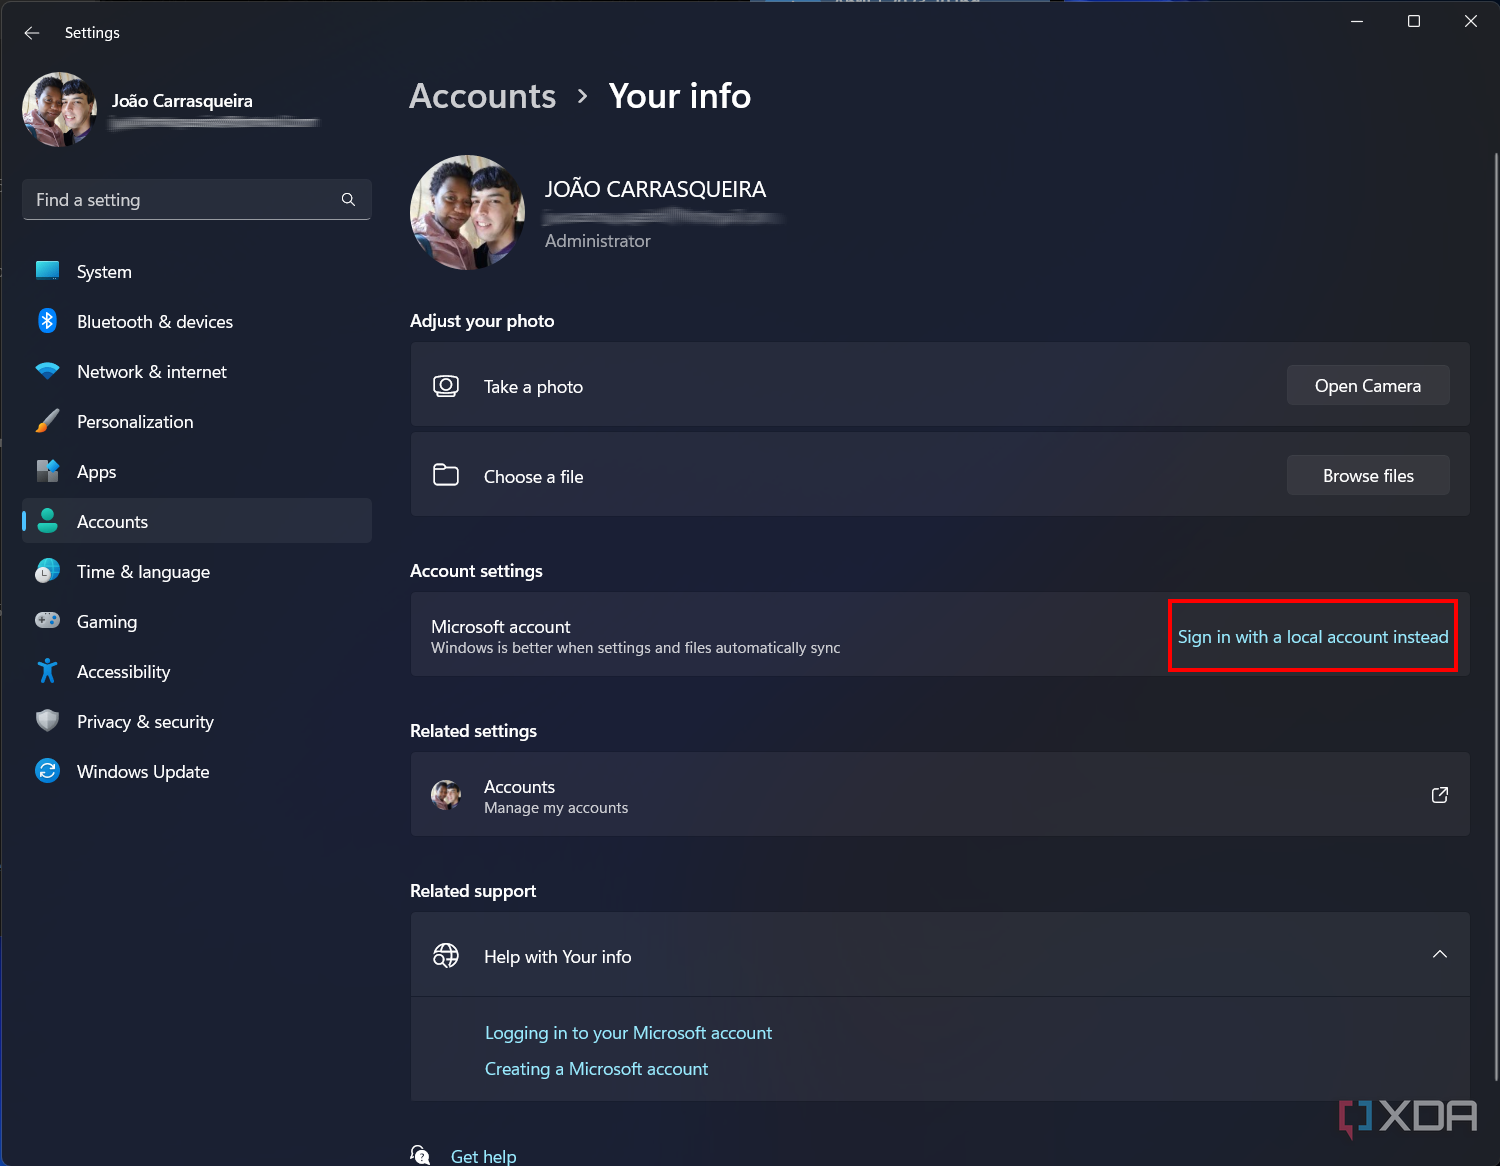 Screenshot of the Your info page with option to switch to a local account highlighted